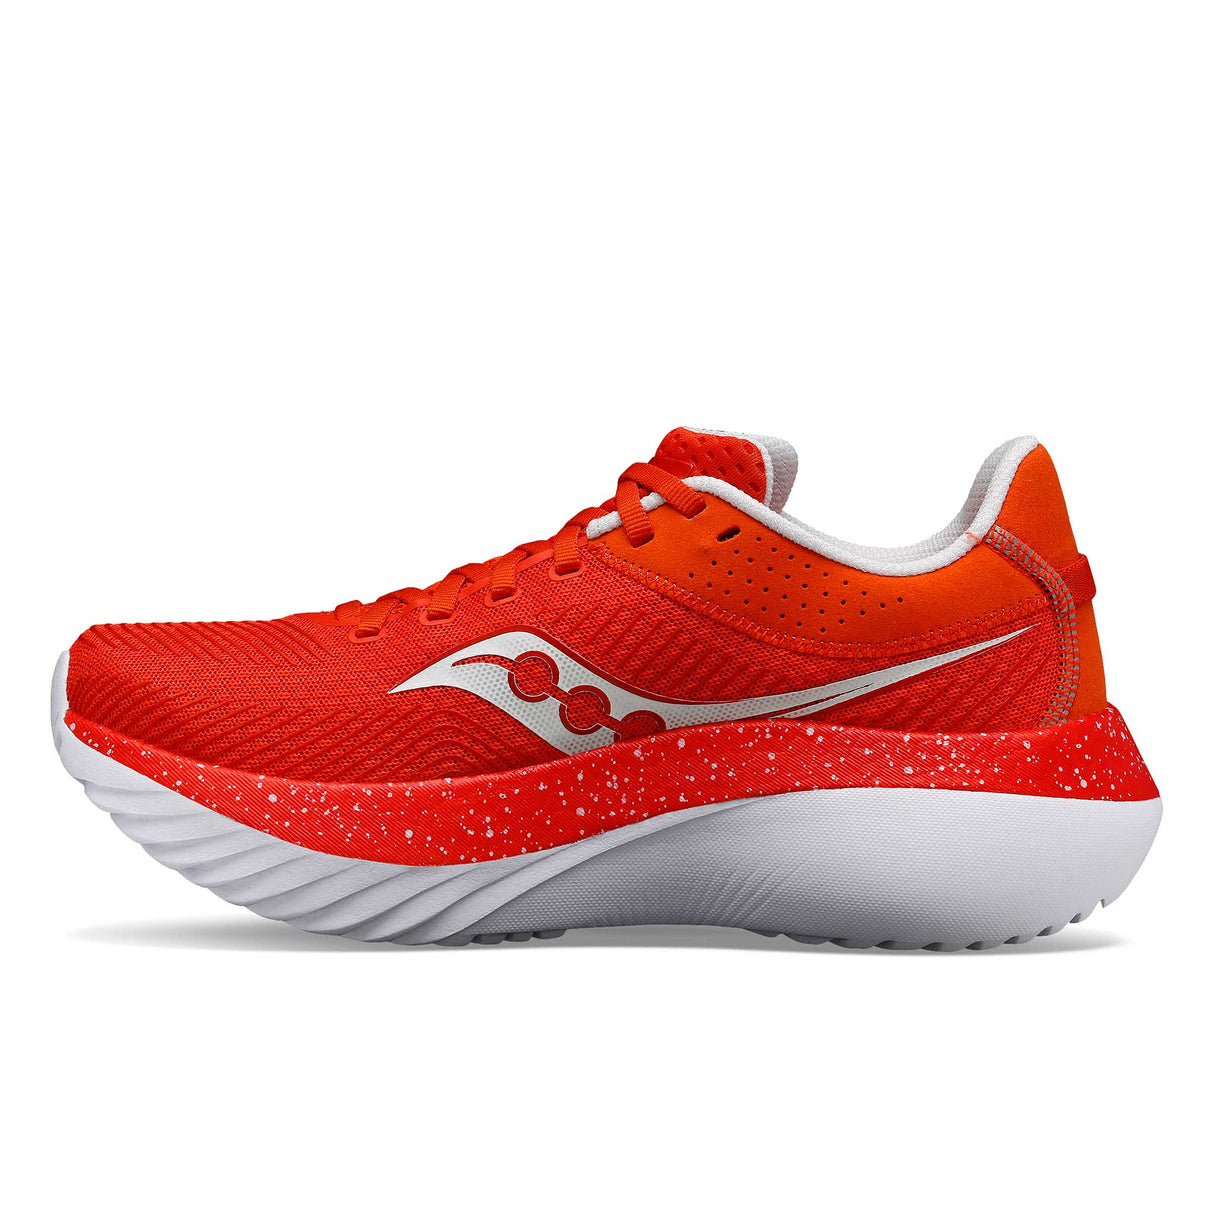 Saucony Kinvara Pro chaussures de course à pied femme lateral - infrared / fog